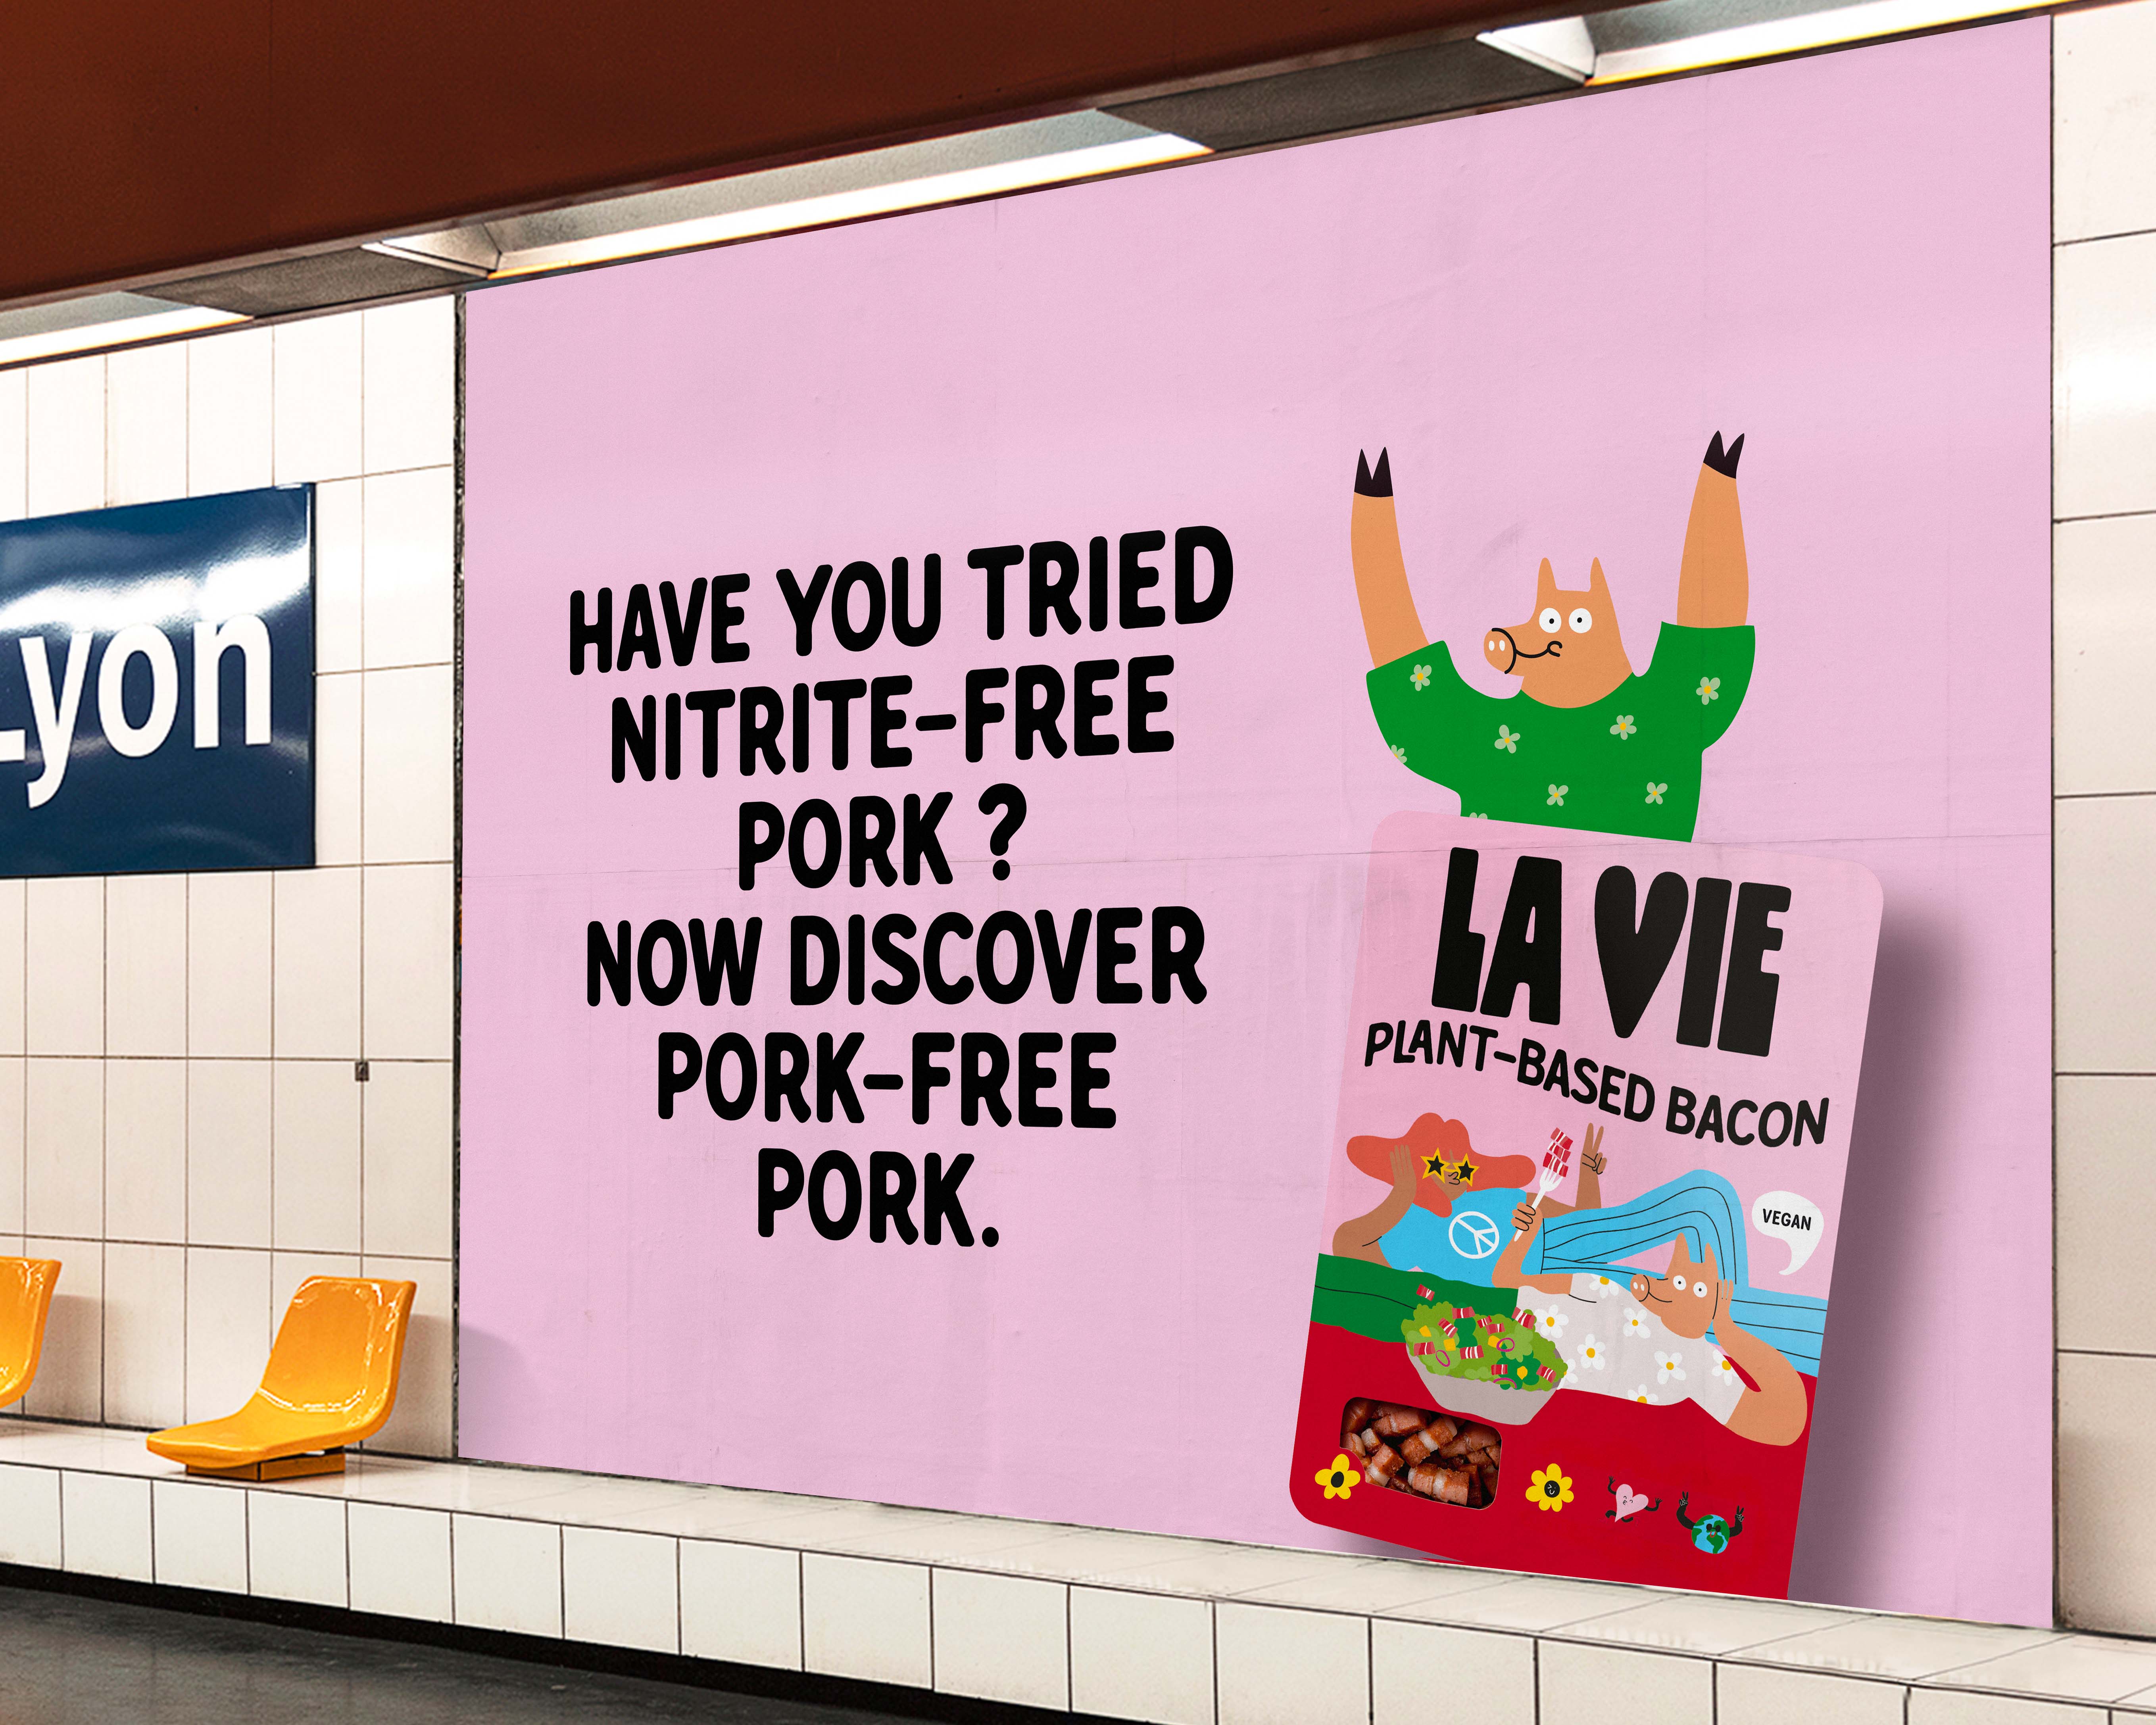 La Vie Believes Plant-Based Bacon Can Bring the World Together